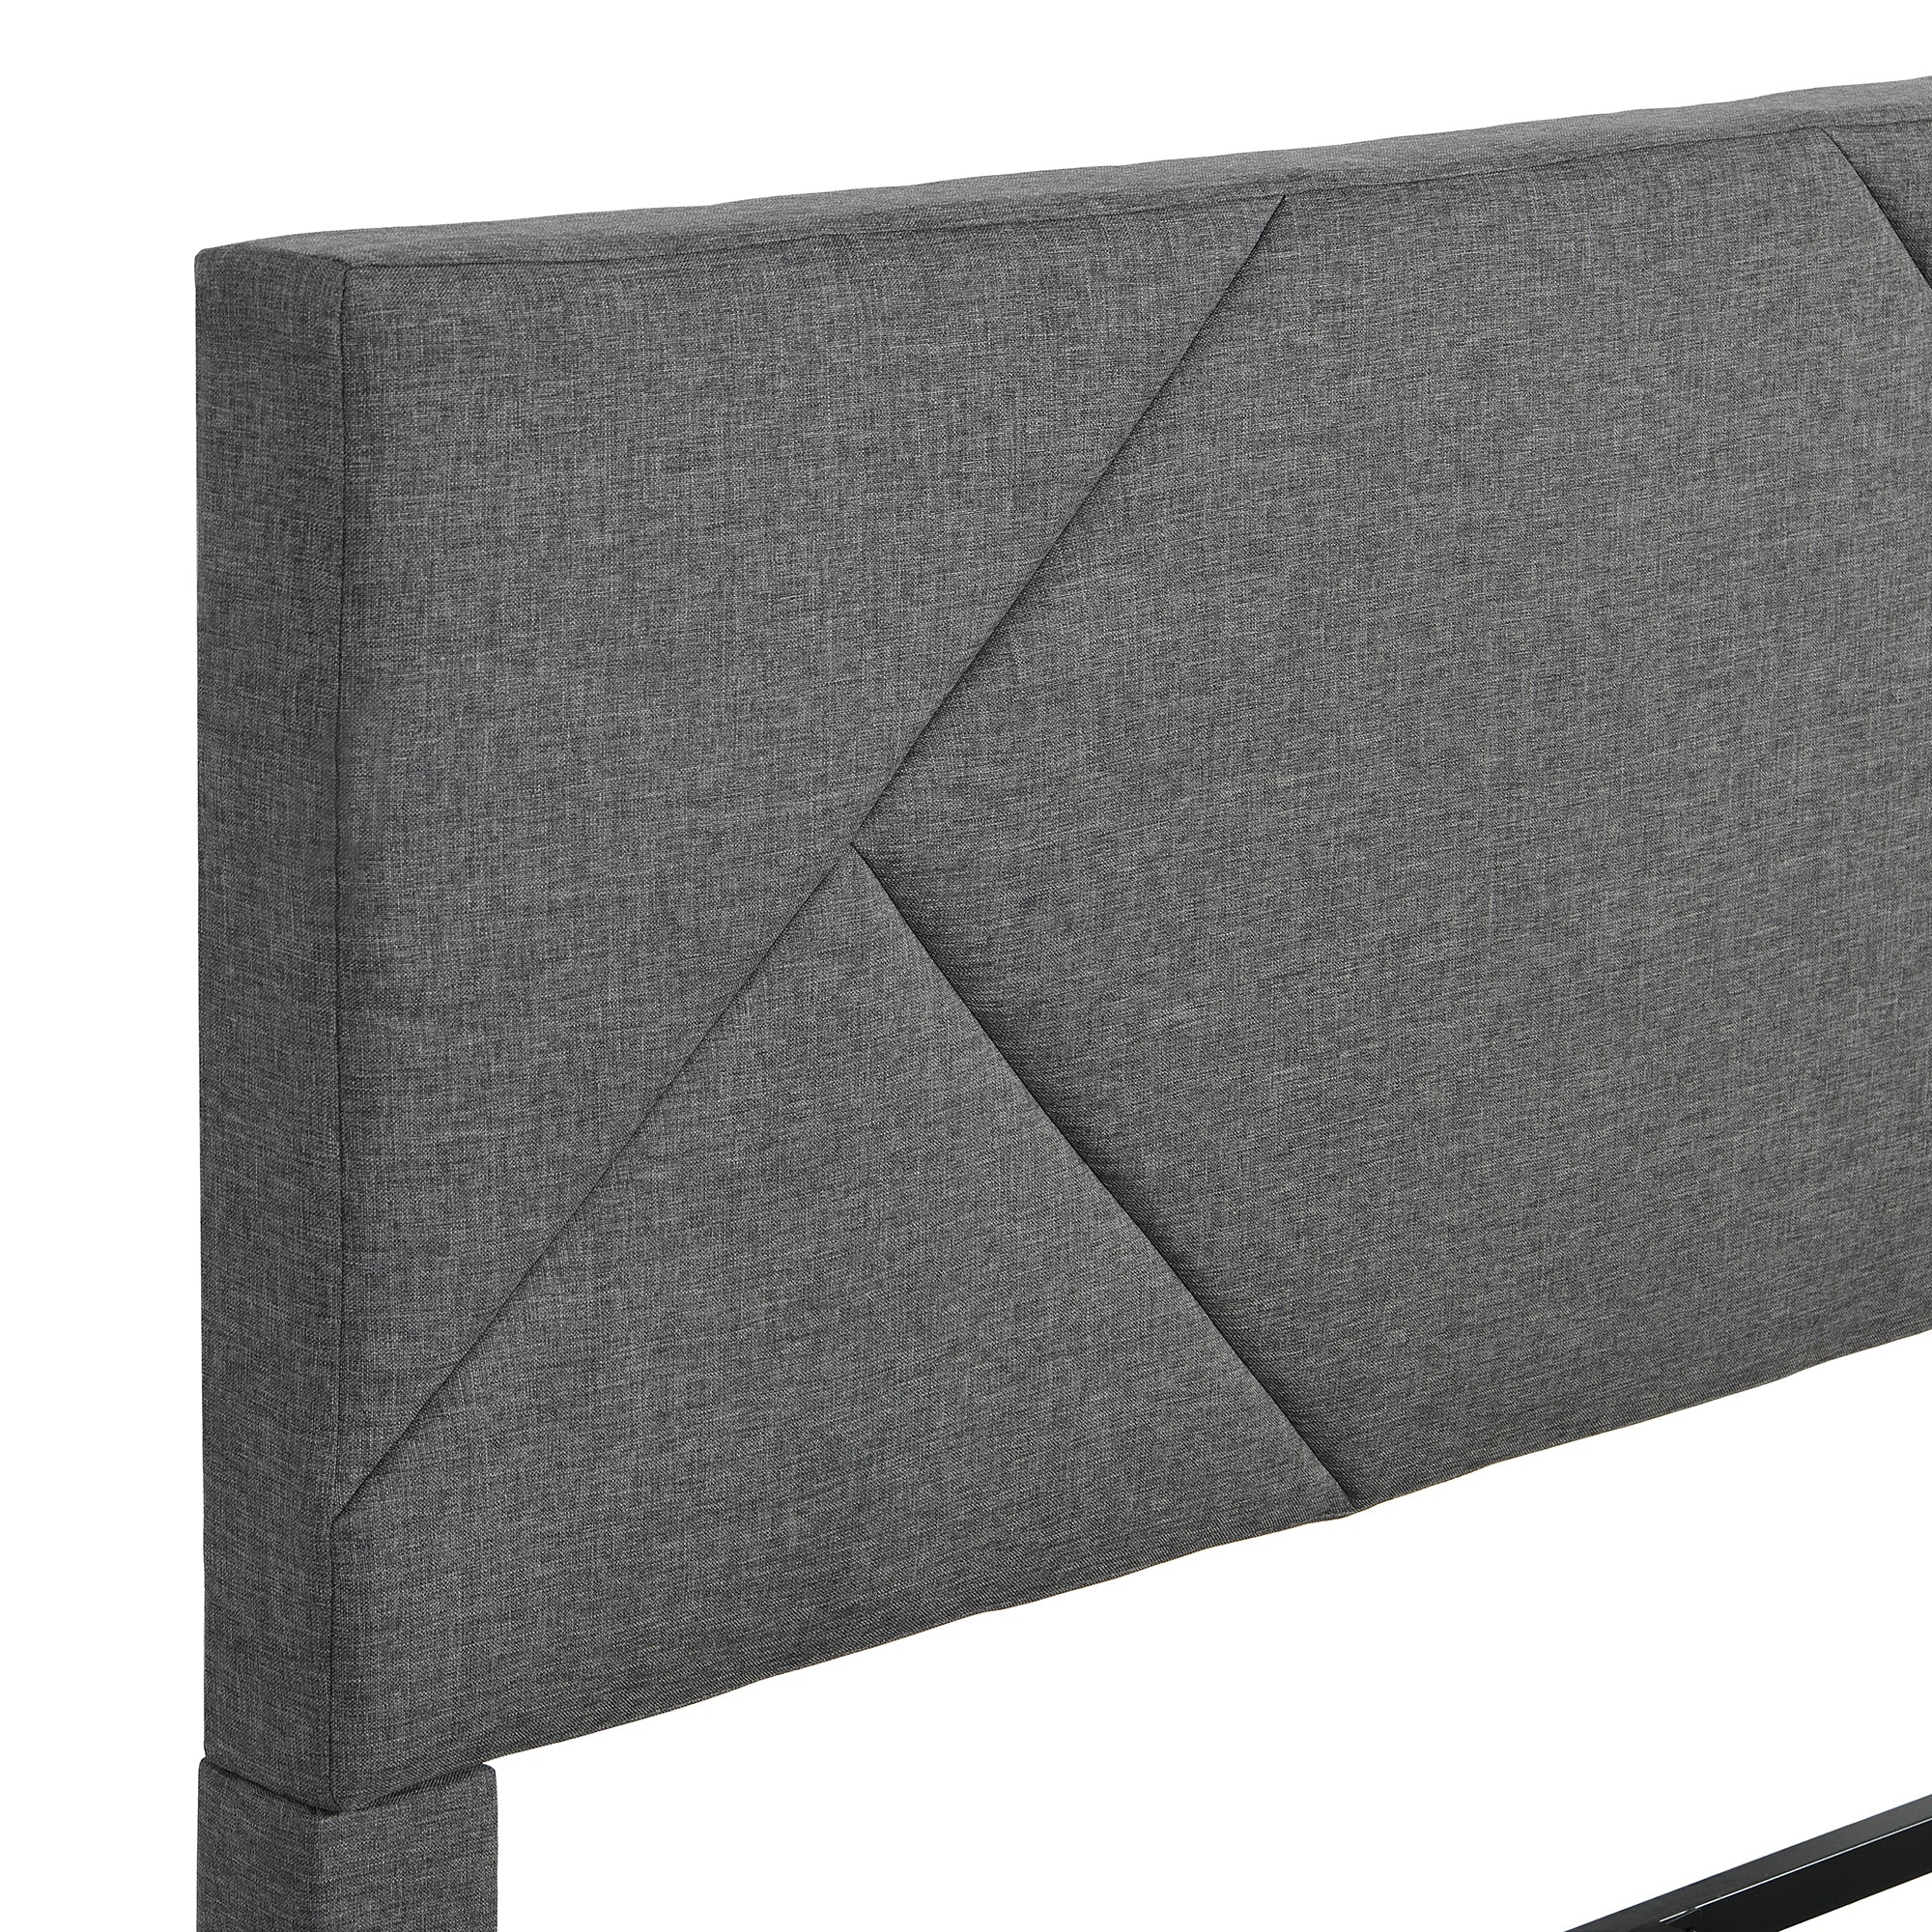 Easy to Assemble Upholstered Bed Frame with Wood Slat in Gray By: Alabama Beds